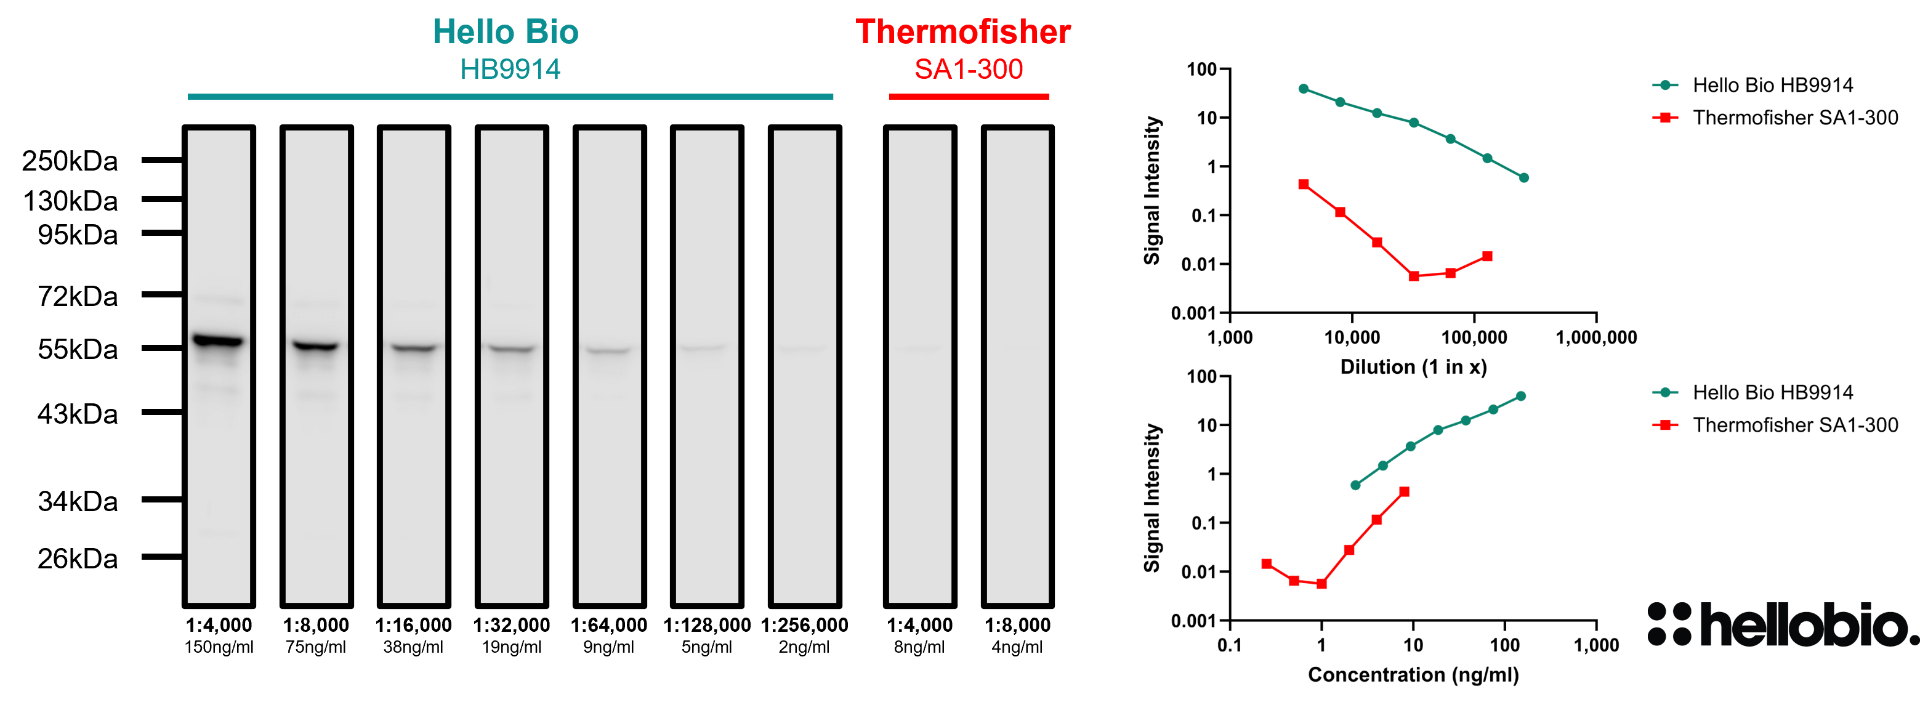 Figure 1. Concentration response of HB9914 staining when using an anti-GFAP (HB6046) primary antibody compared to Thermofisher SA1-300.